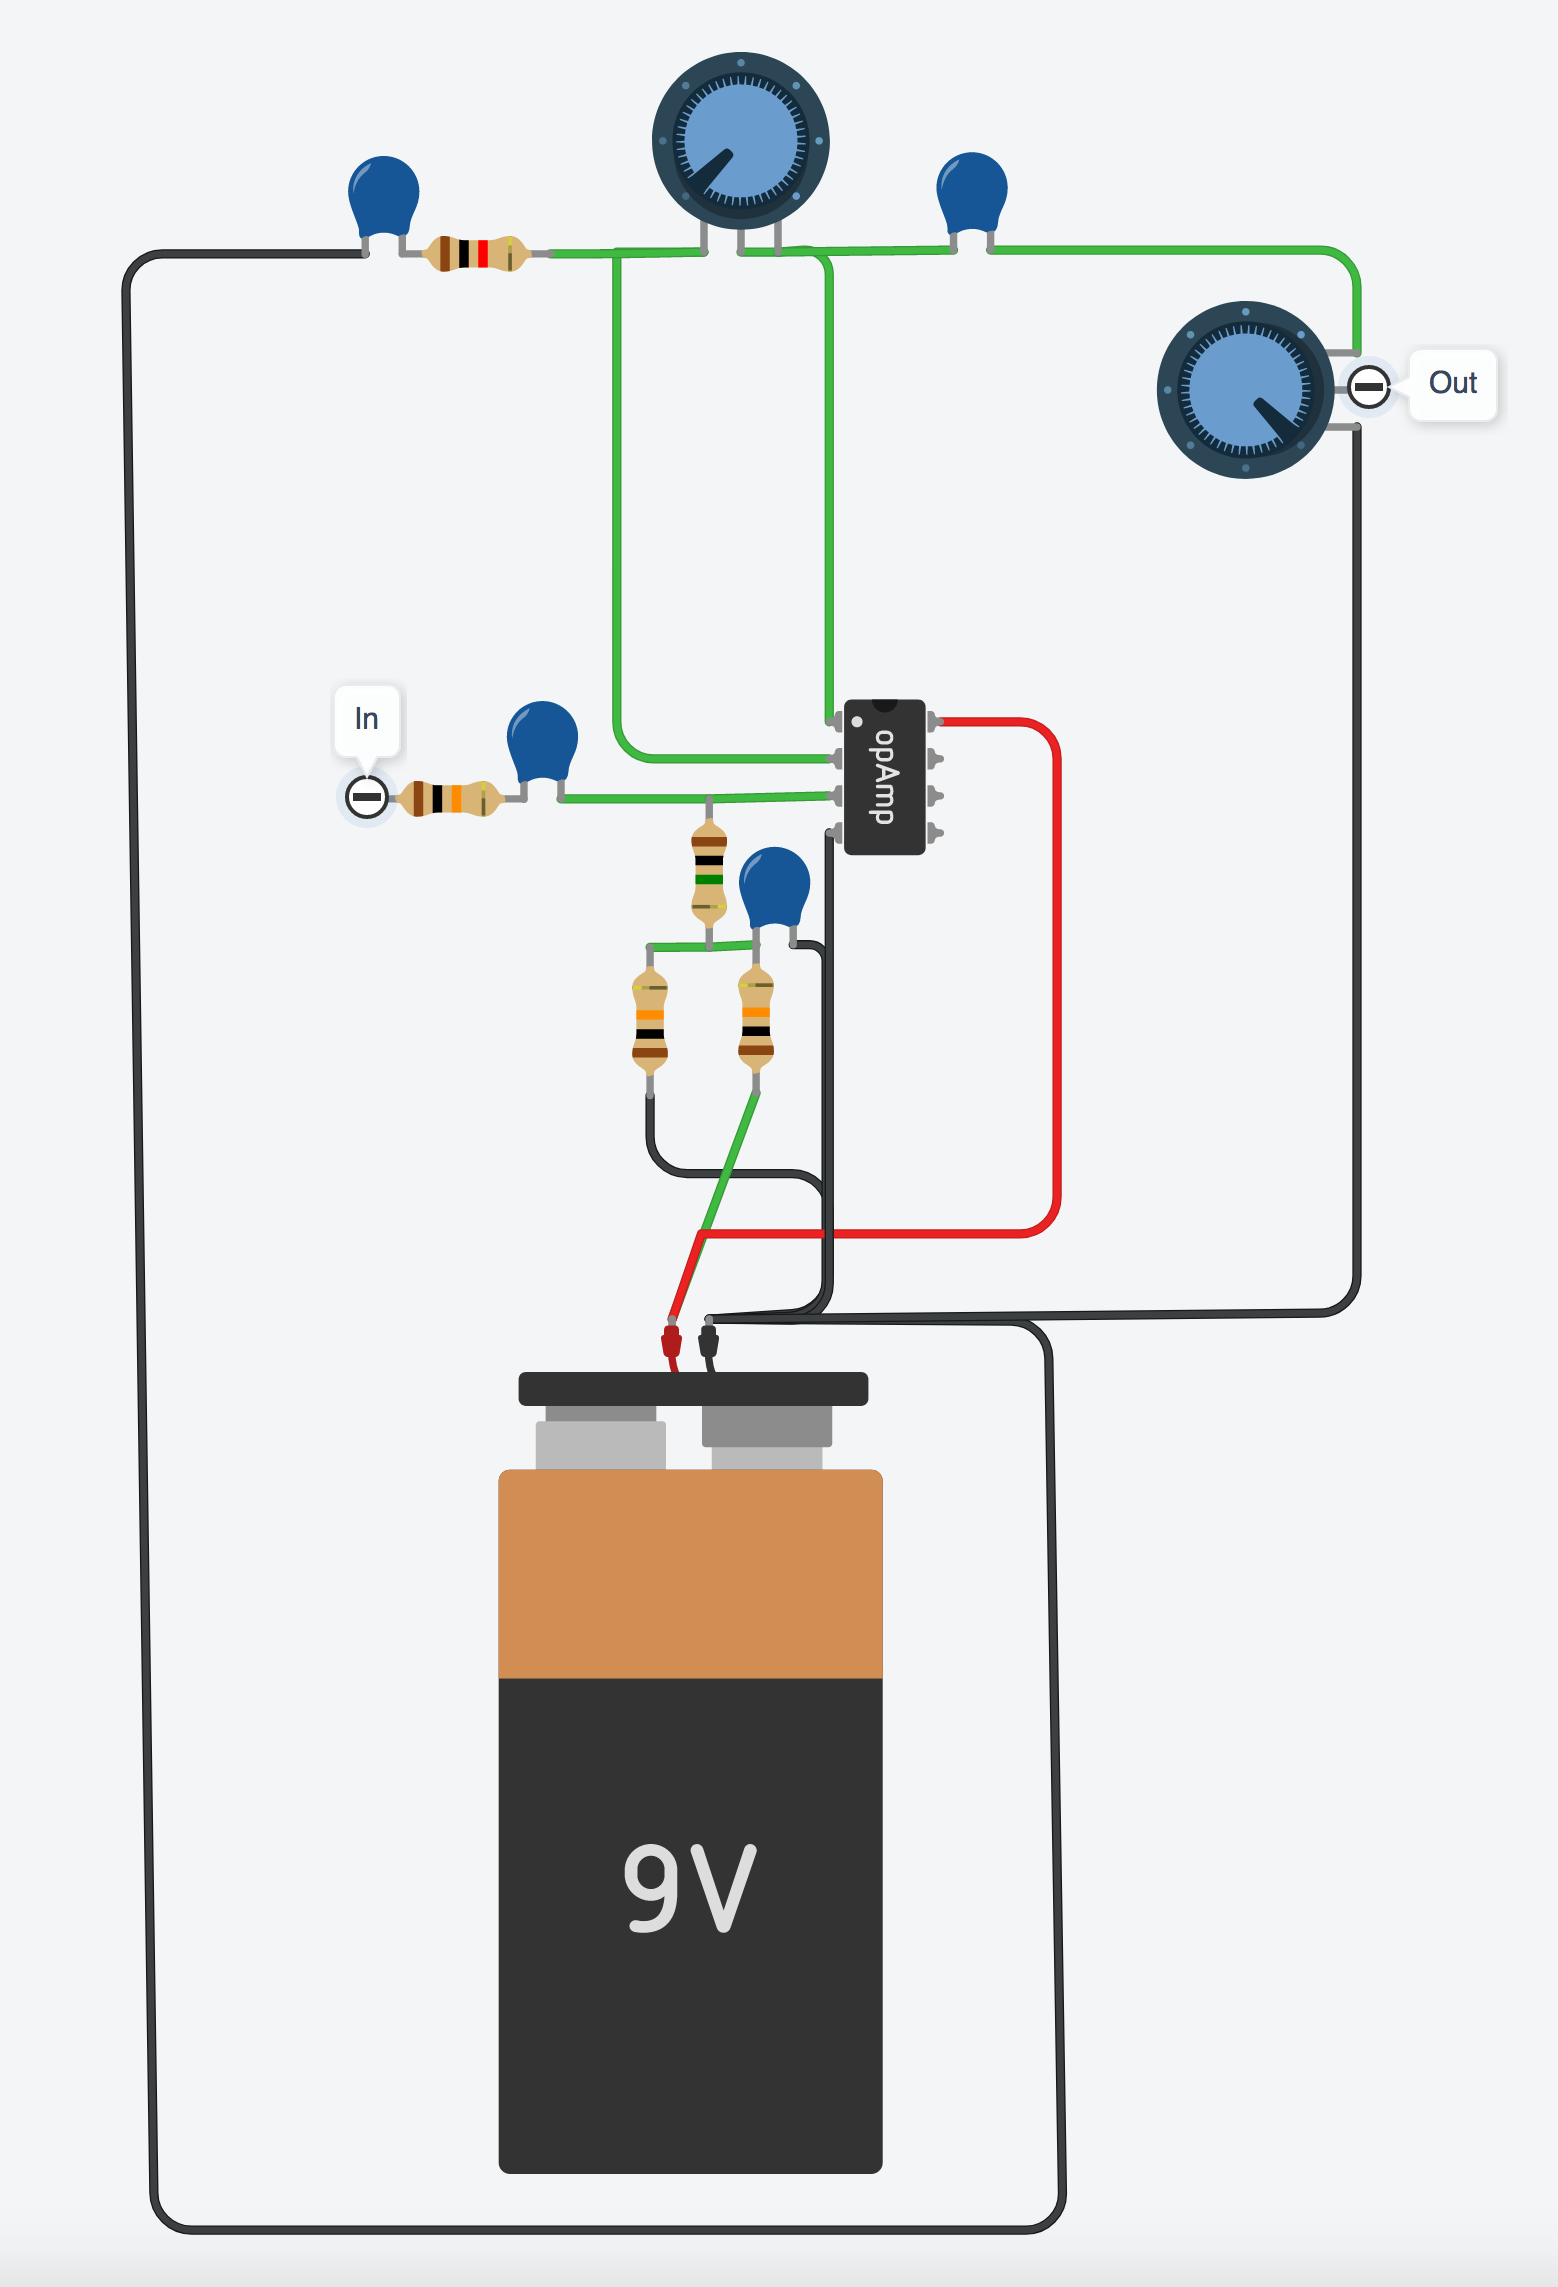 account Beoordeling kalf How to design a basic overdrive pedal circuit - Wampler Pedals